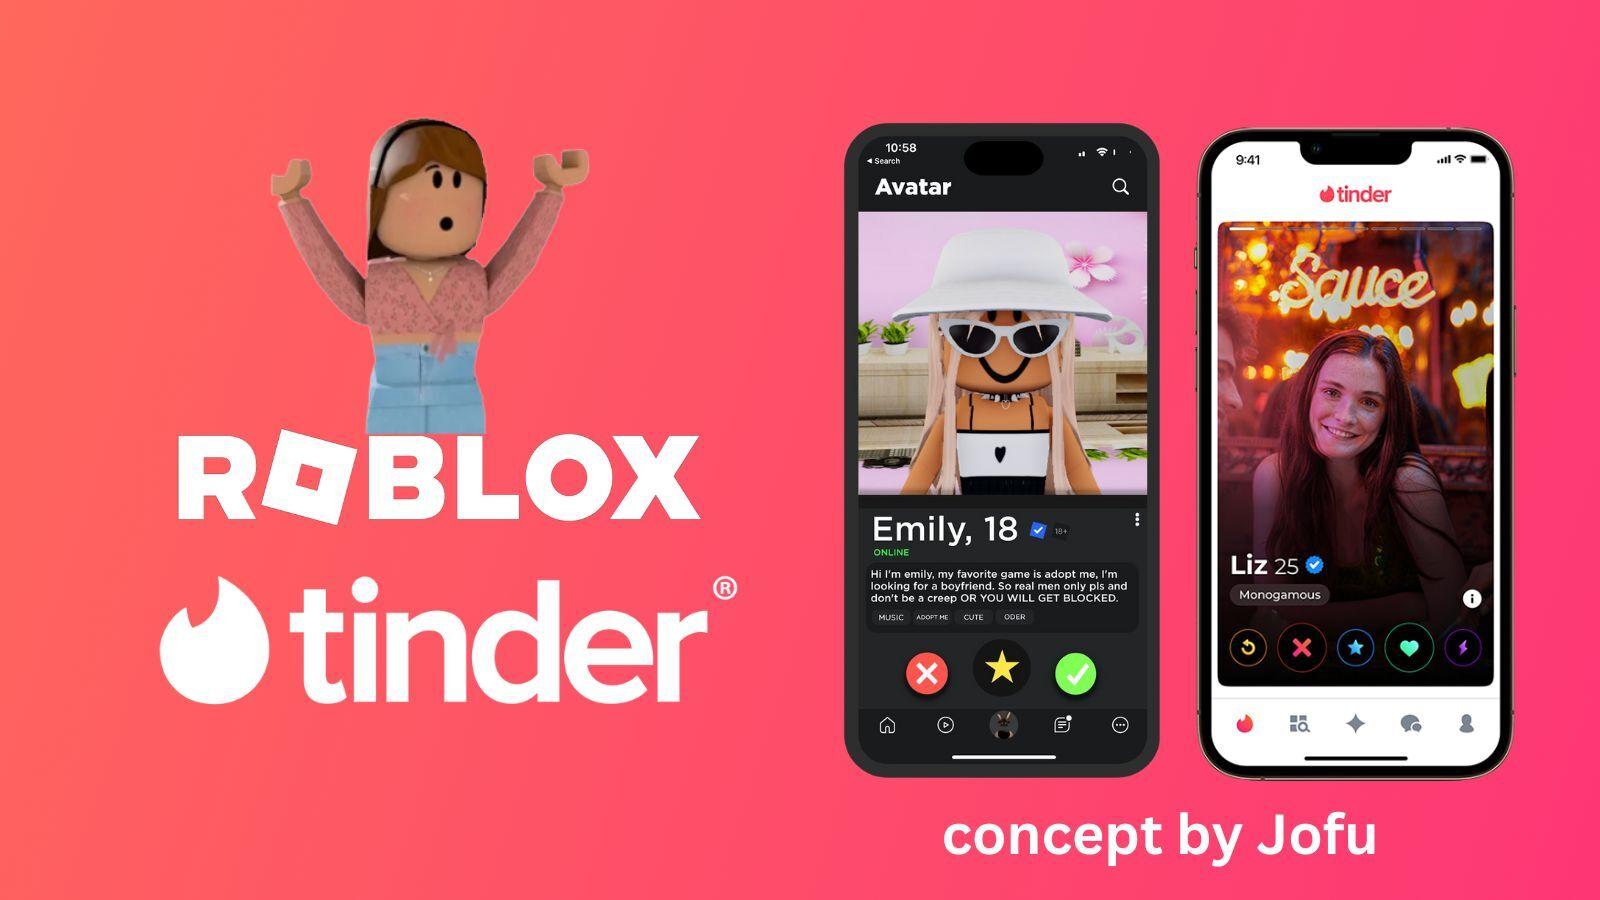 Roblox Tinder features